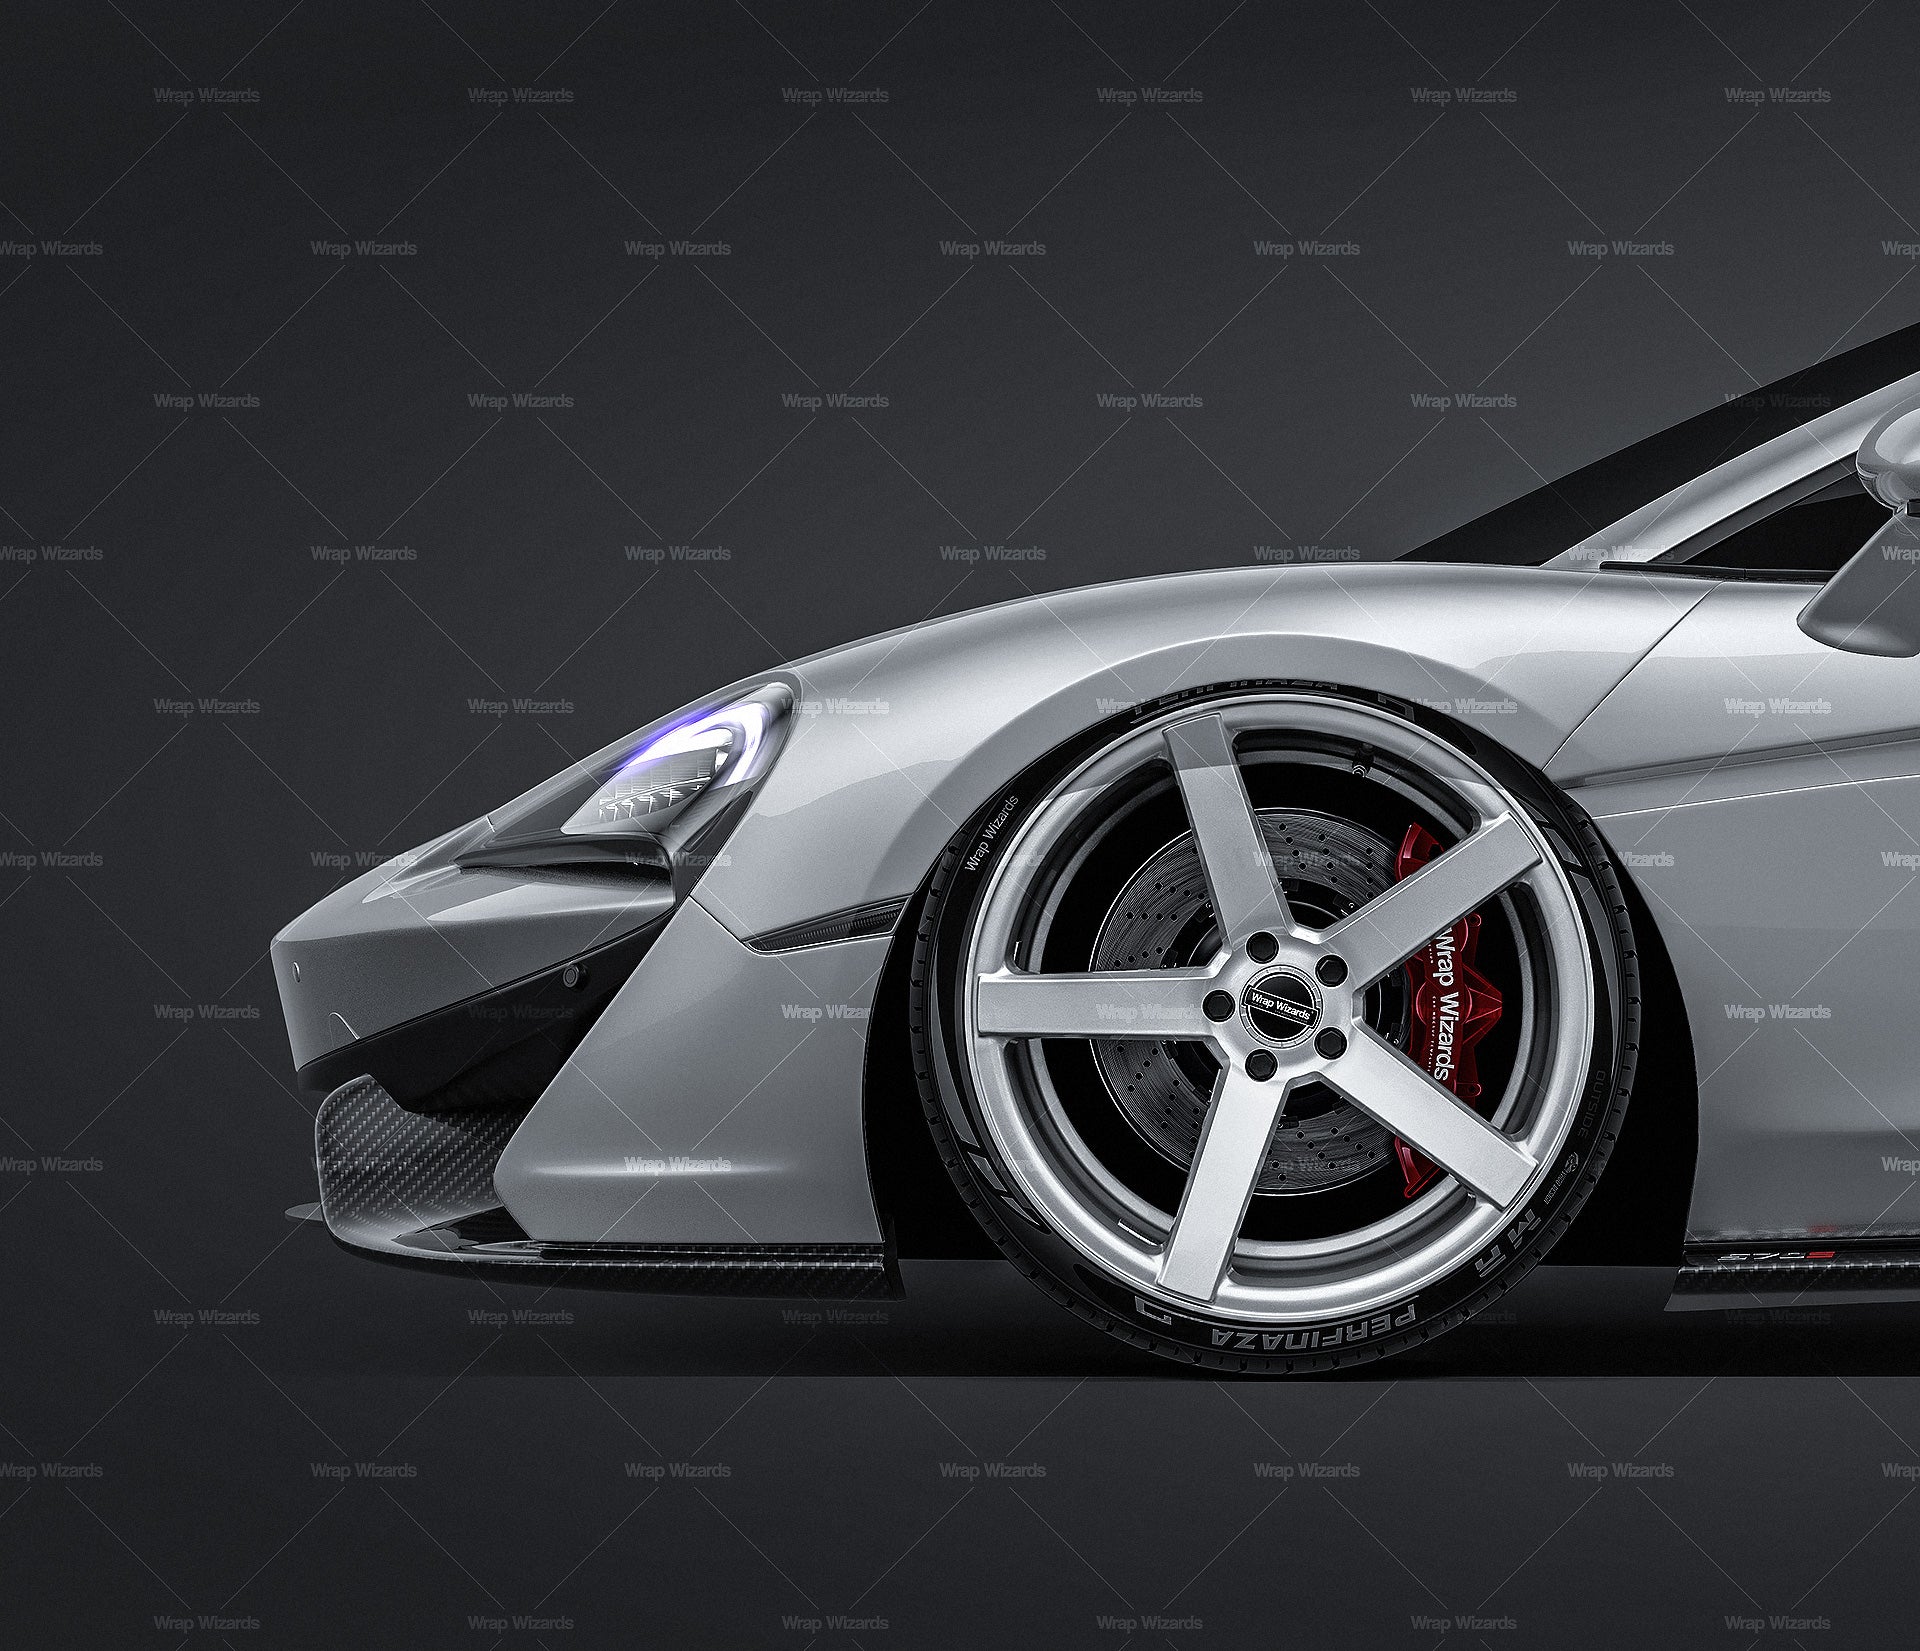 McLaren 570S Spider 2018 glossy finish - all sides Car Mockup Template.psd